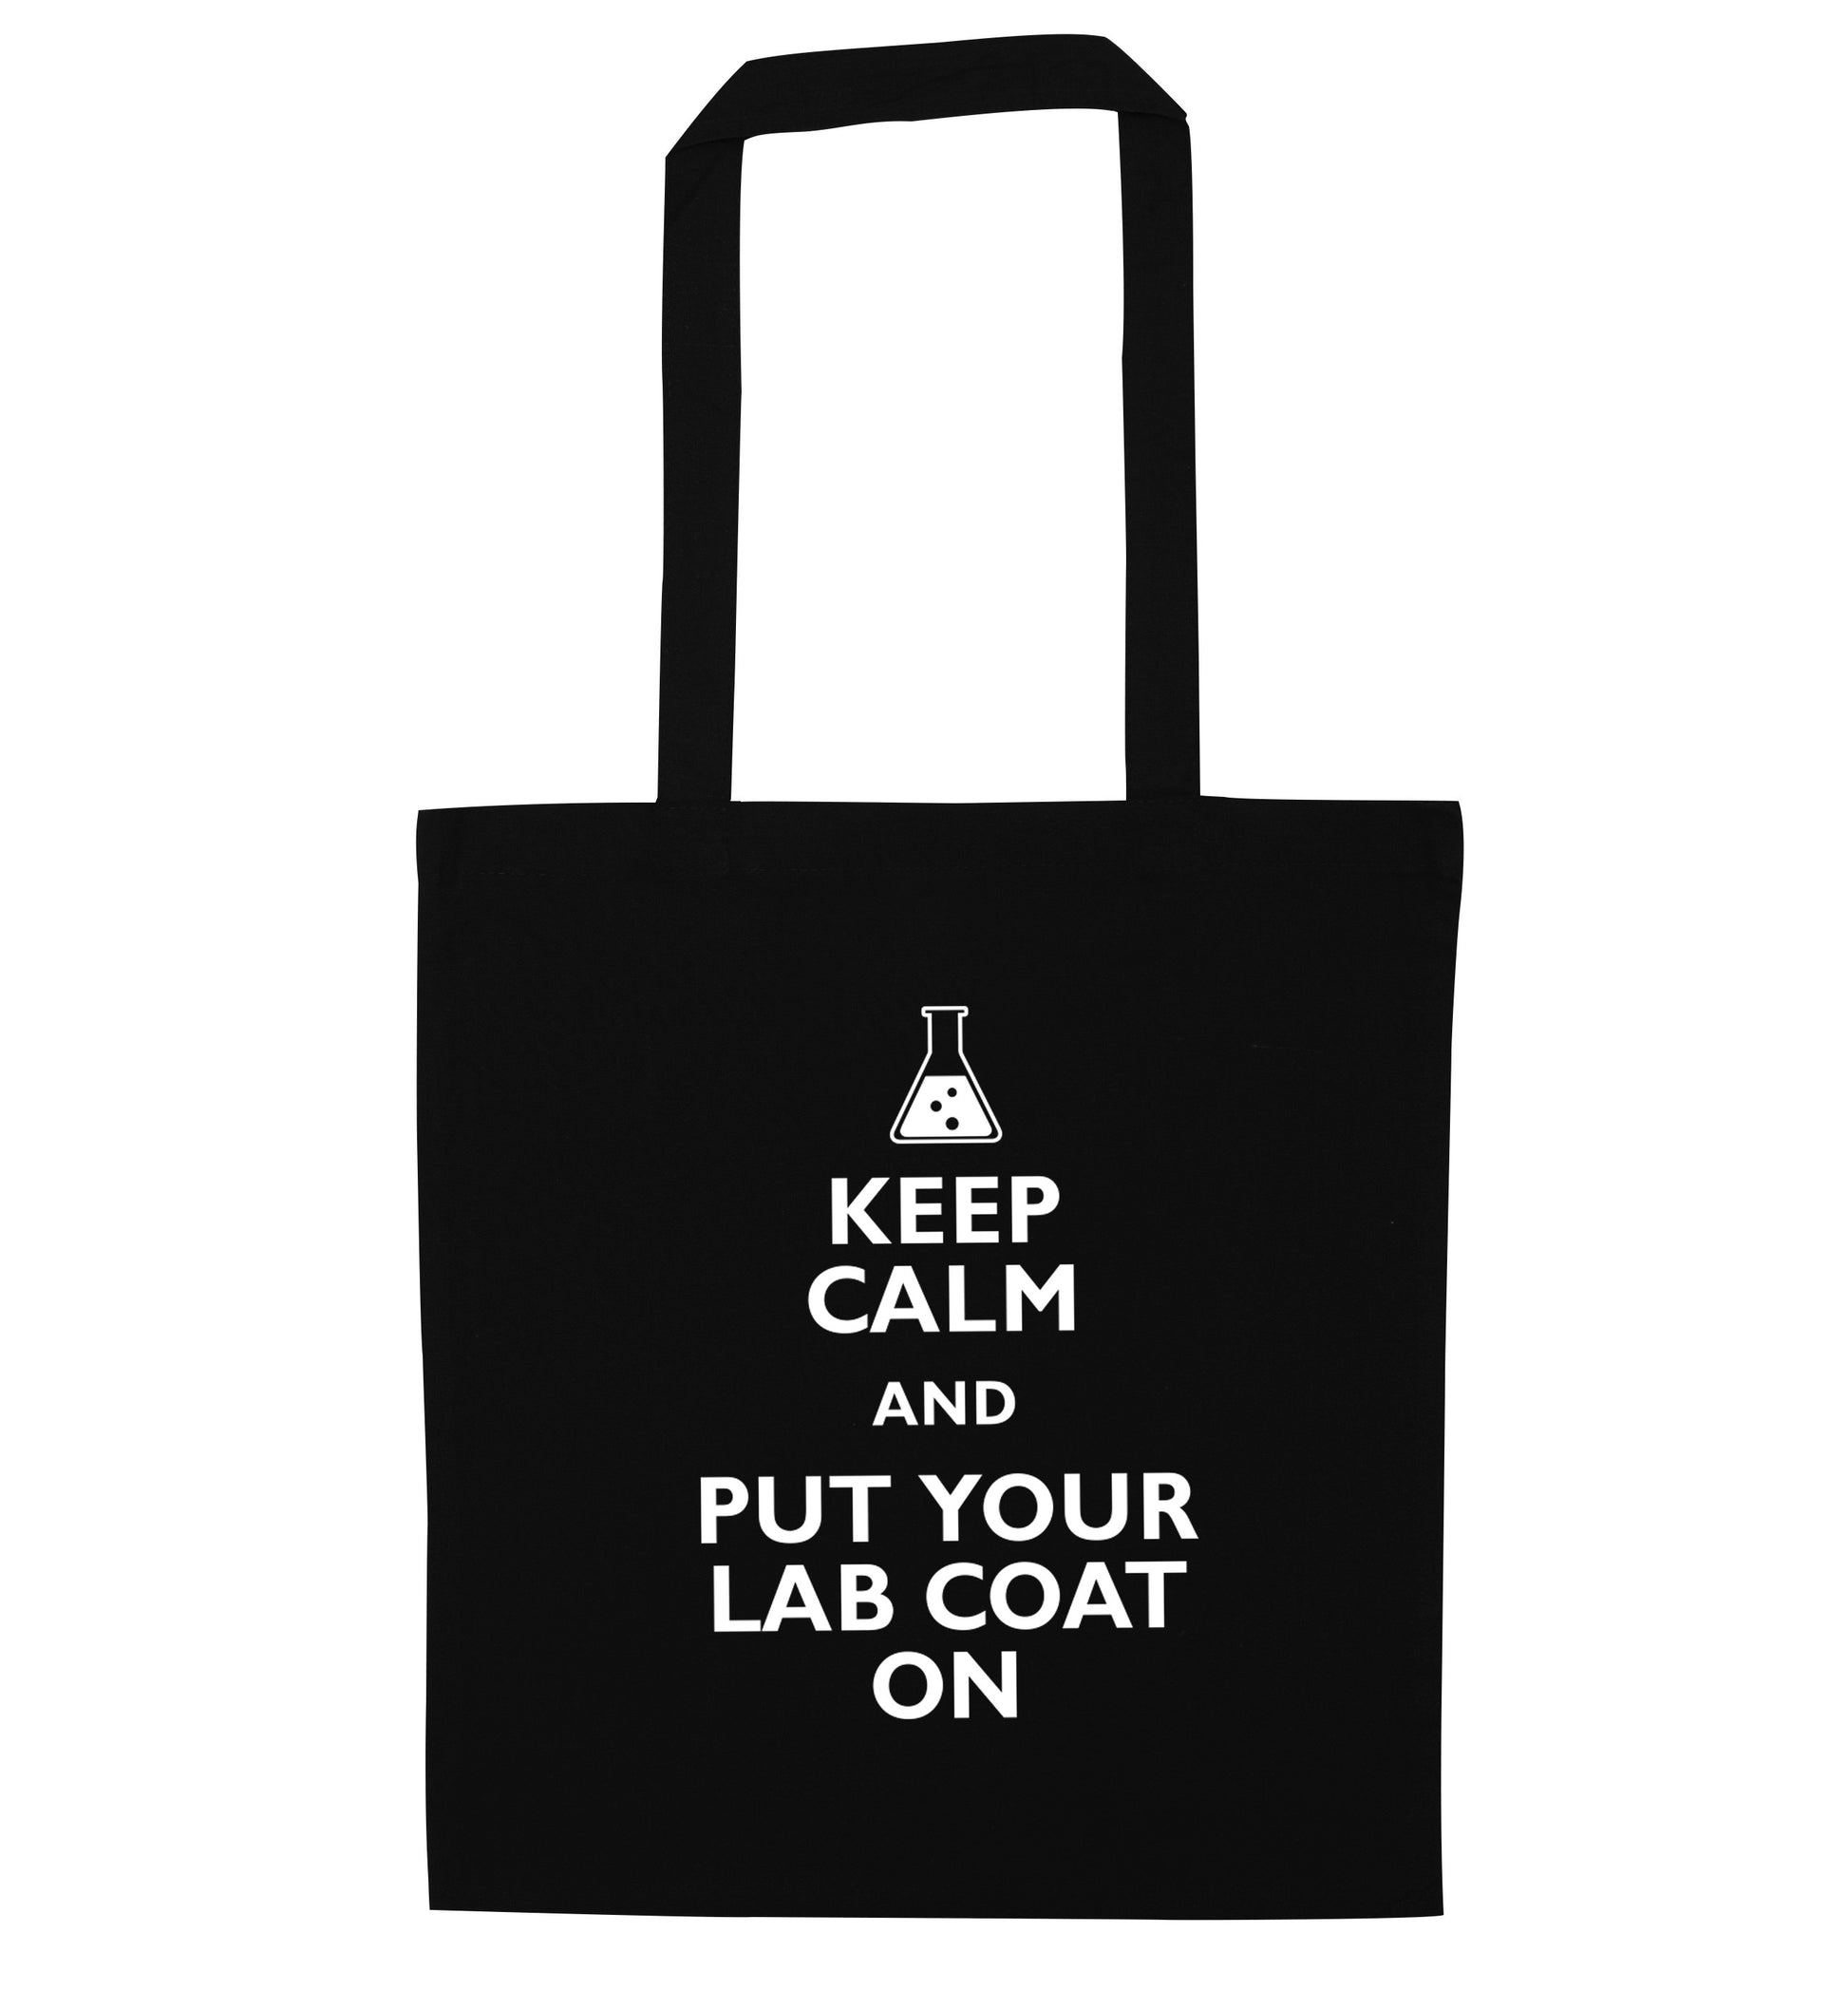 Keep calm and put your lab coat on black tote bag